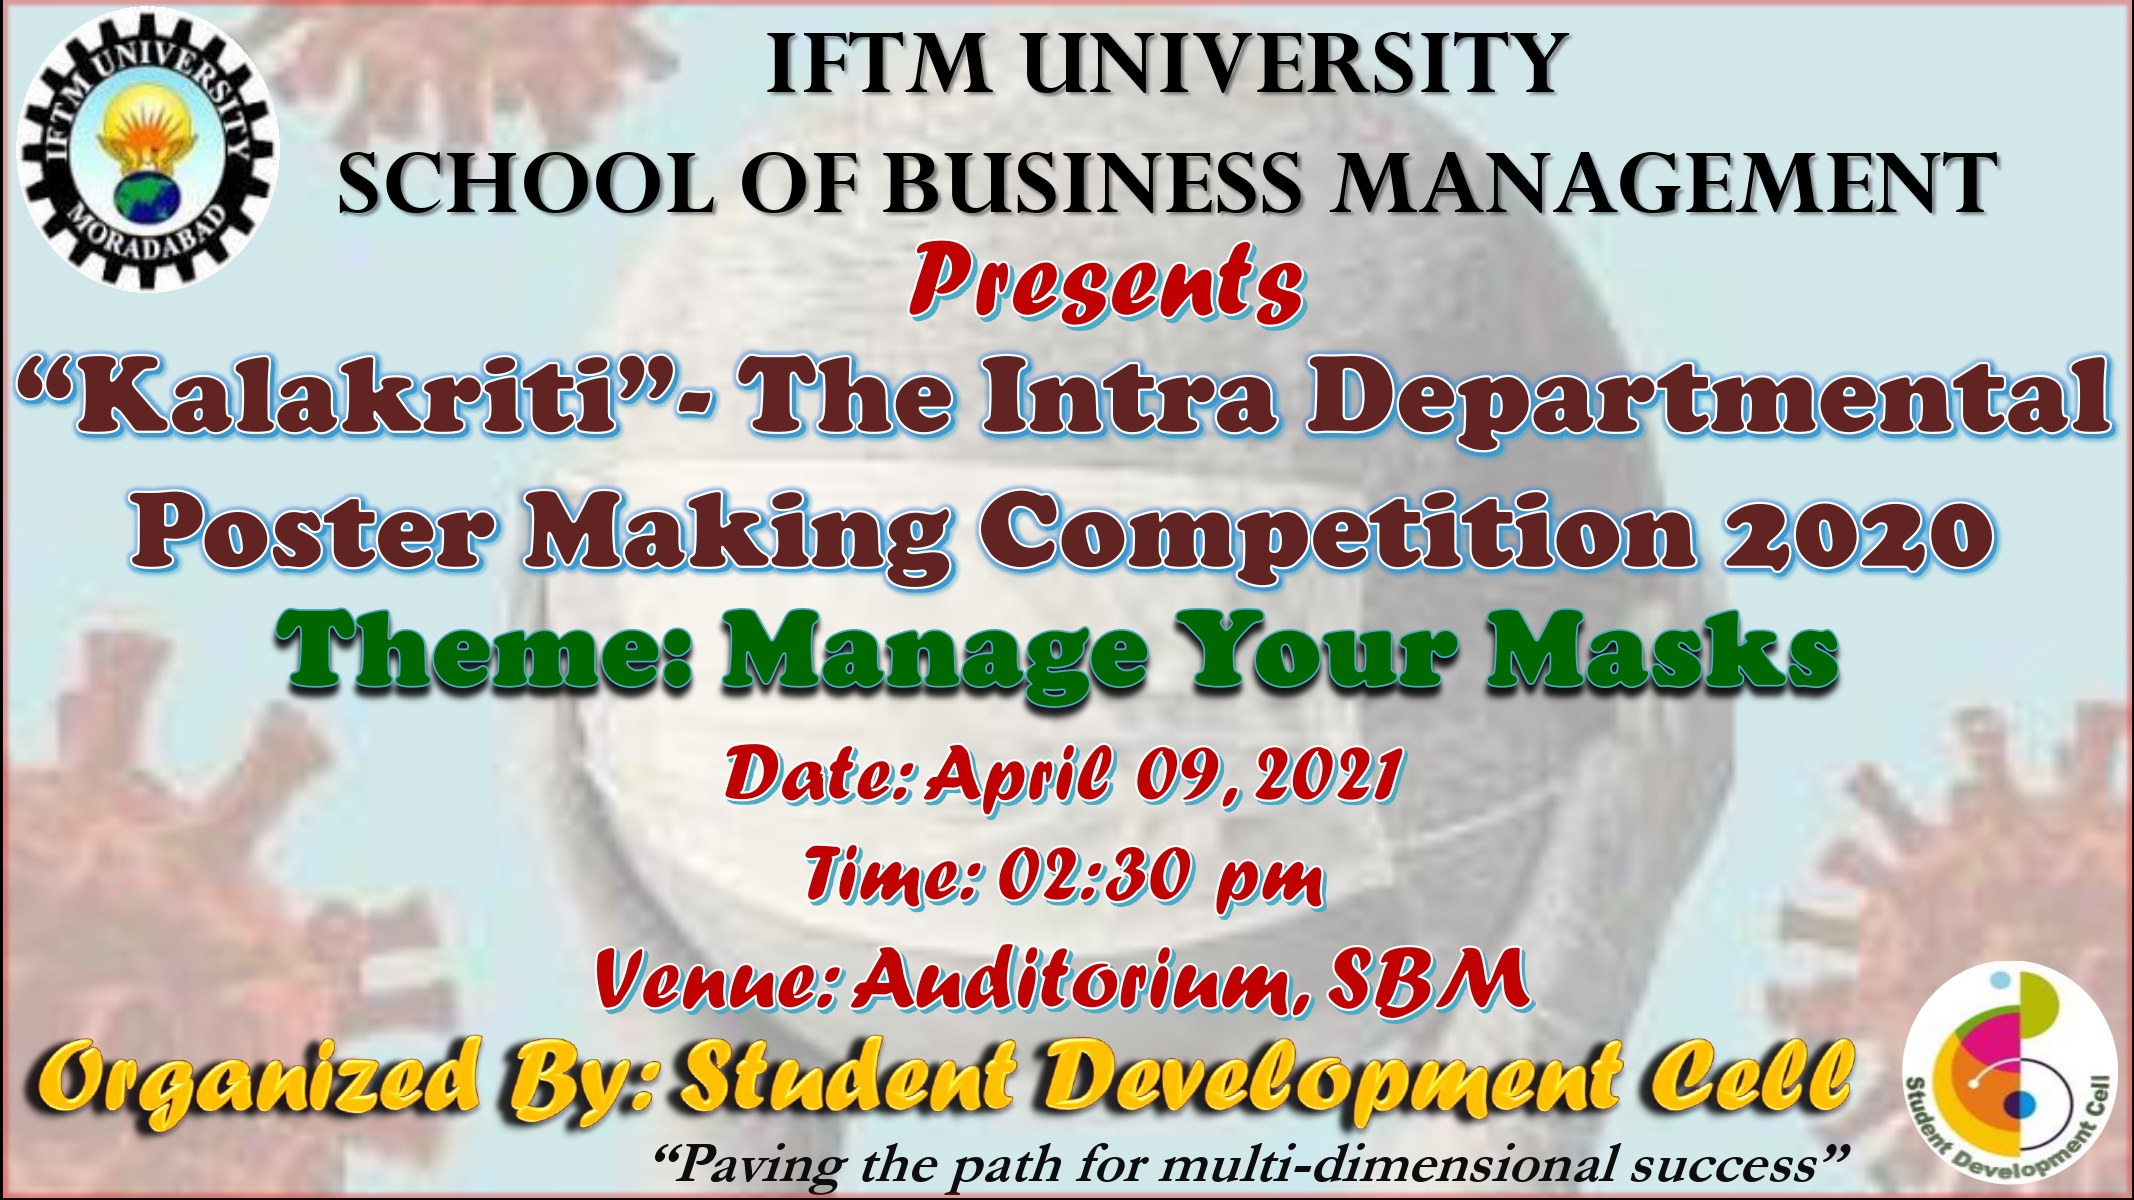 Kalakriti - The Intra Departmental Poster Making Competition 2020 on "Manage Your Masks"